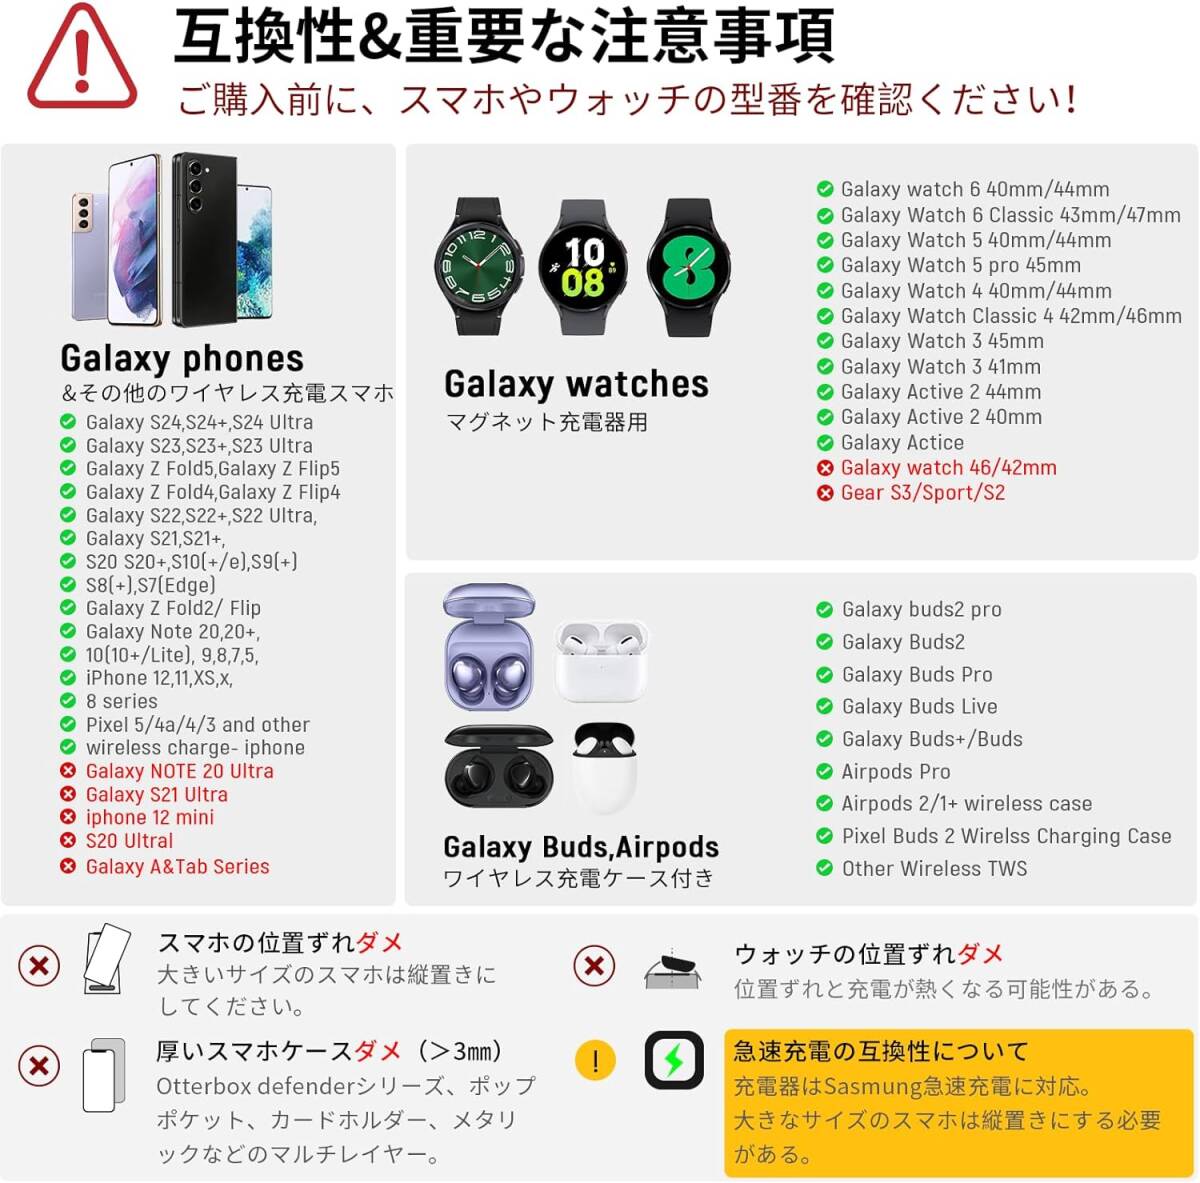 3in1 wireless charger eyes ... clock attaching Galaxy S24 ~ S7, Note 20 ~ 8, Galaxy watch 6/5/3/active2/active, Galaxy Buds black 